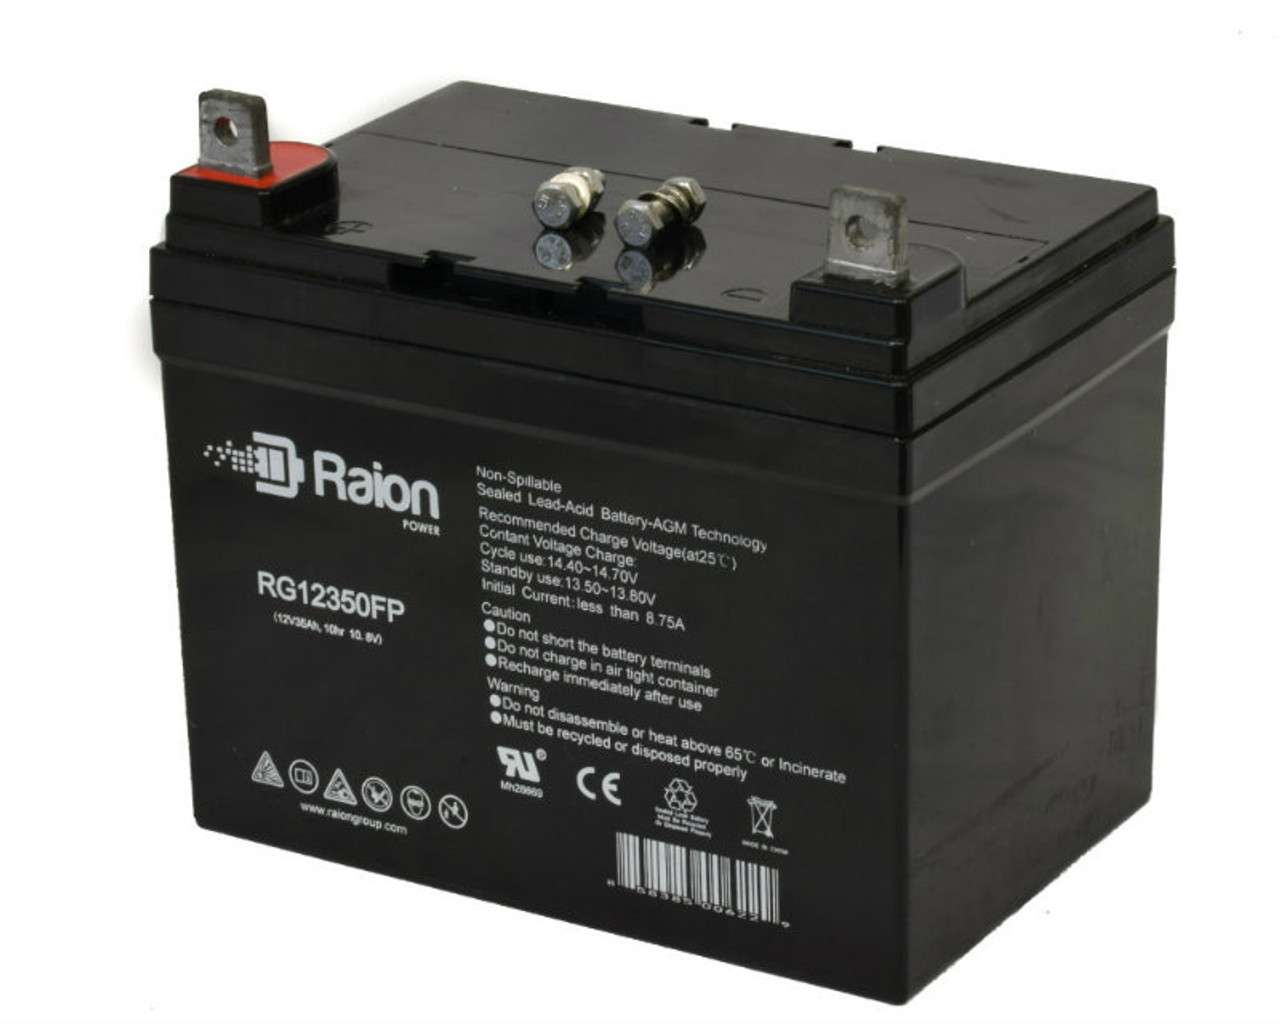 Raion Power Replacement 12V 35Ah Battery for Ingersol Equipment 4018 - 1 Pack